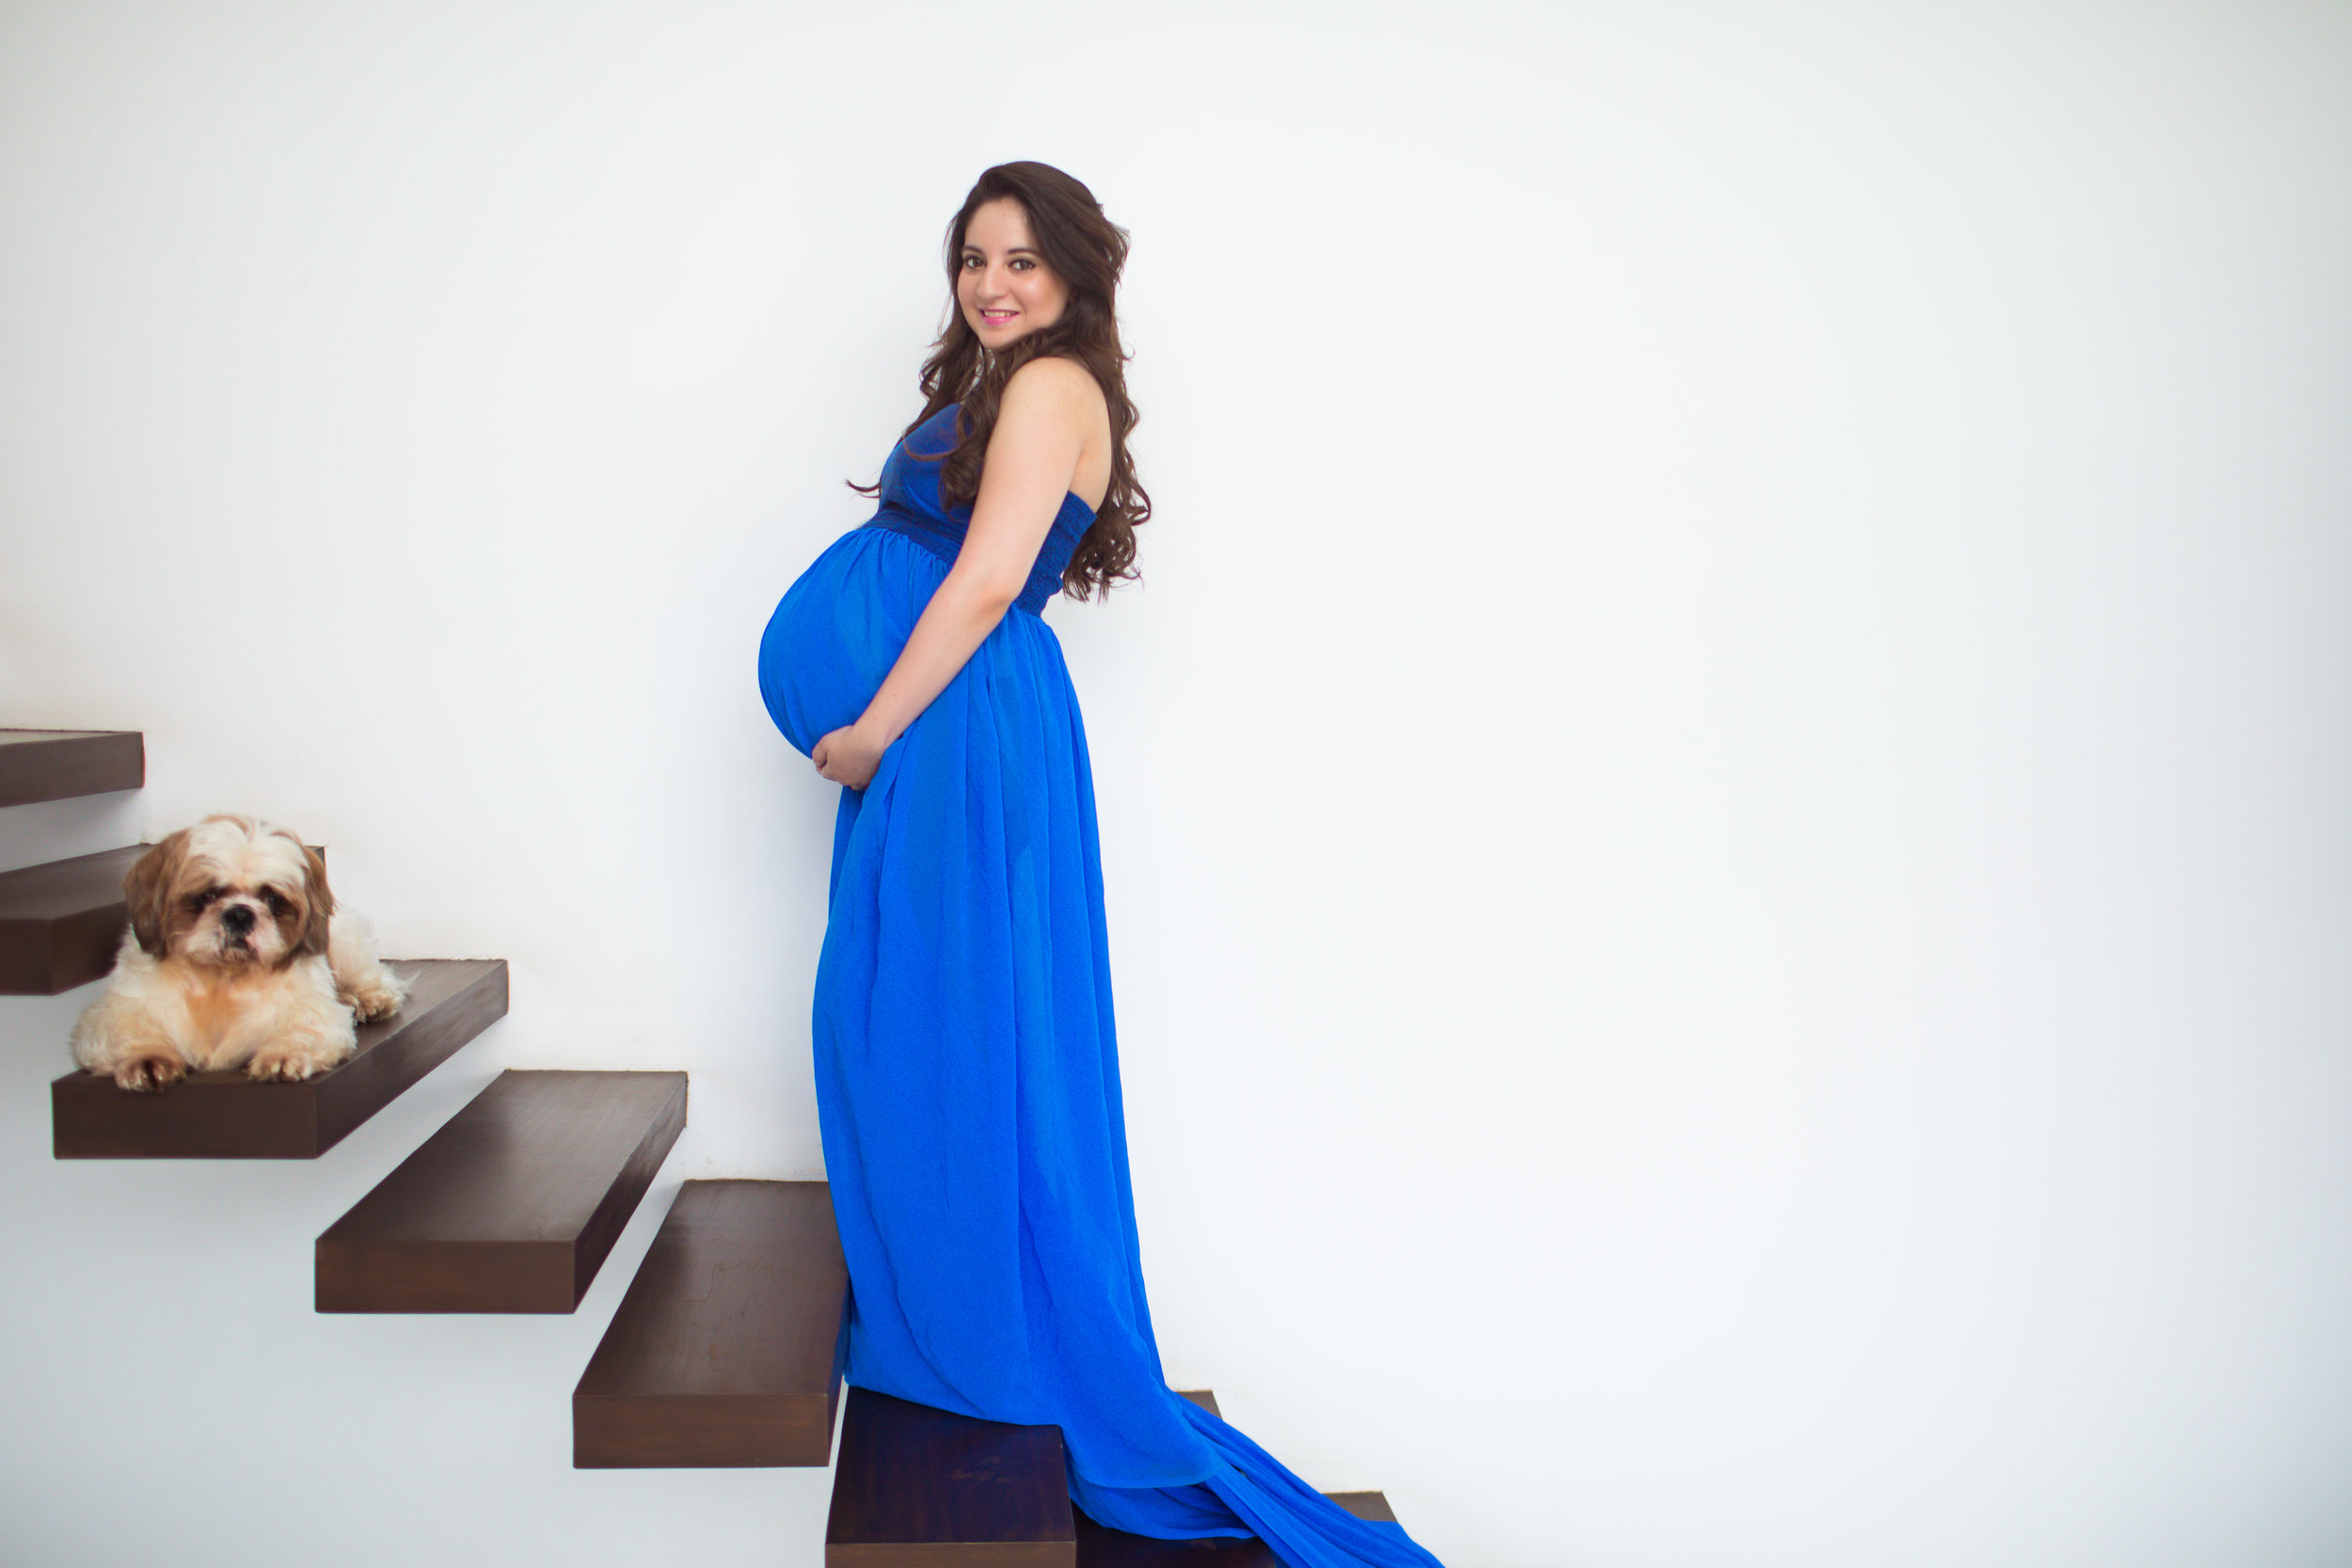 Mom to be in a long royal blue dress posing on stairs with a Shih-Tzu dog for a maternity photoshoot | Indian Maternity Photoshoot Ideas | Adorable maternity photo shoot ideas with pets for cute pictures | Cute Pregnancy Photoshoot with Dogs for expecting couples | Function Mania